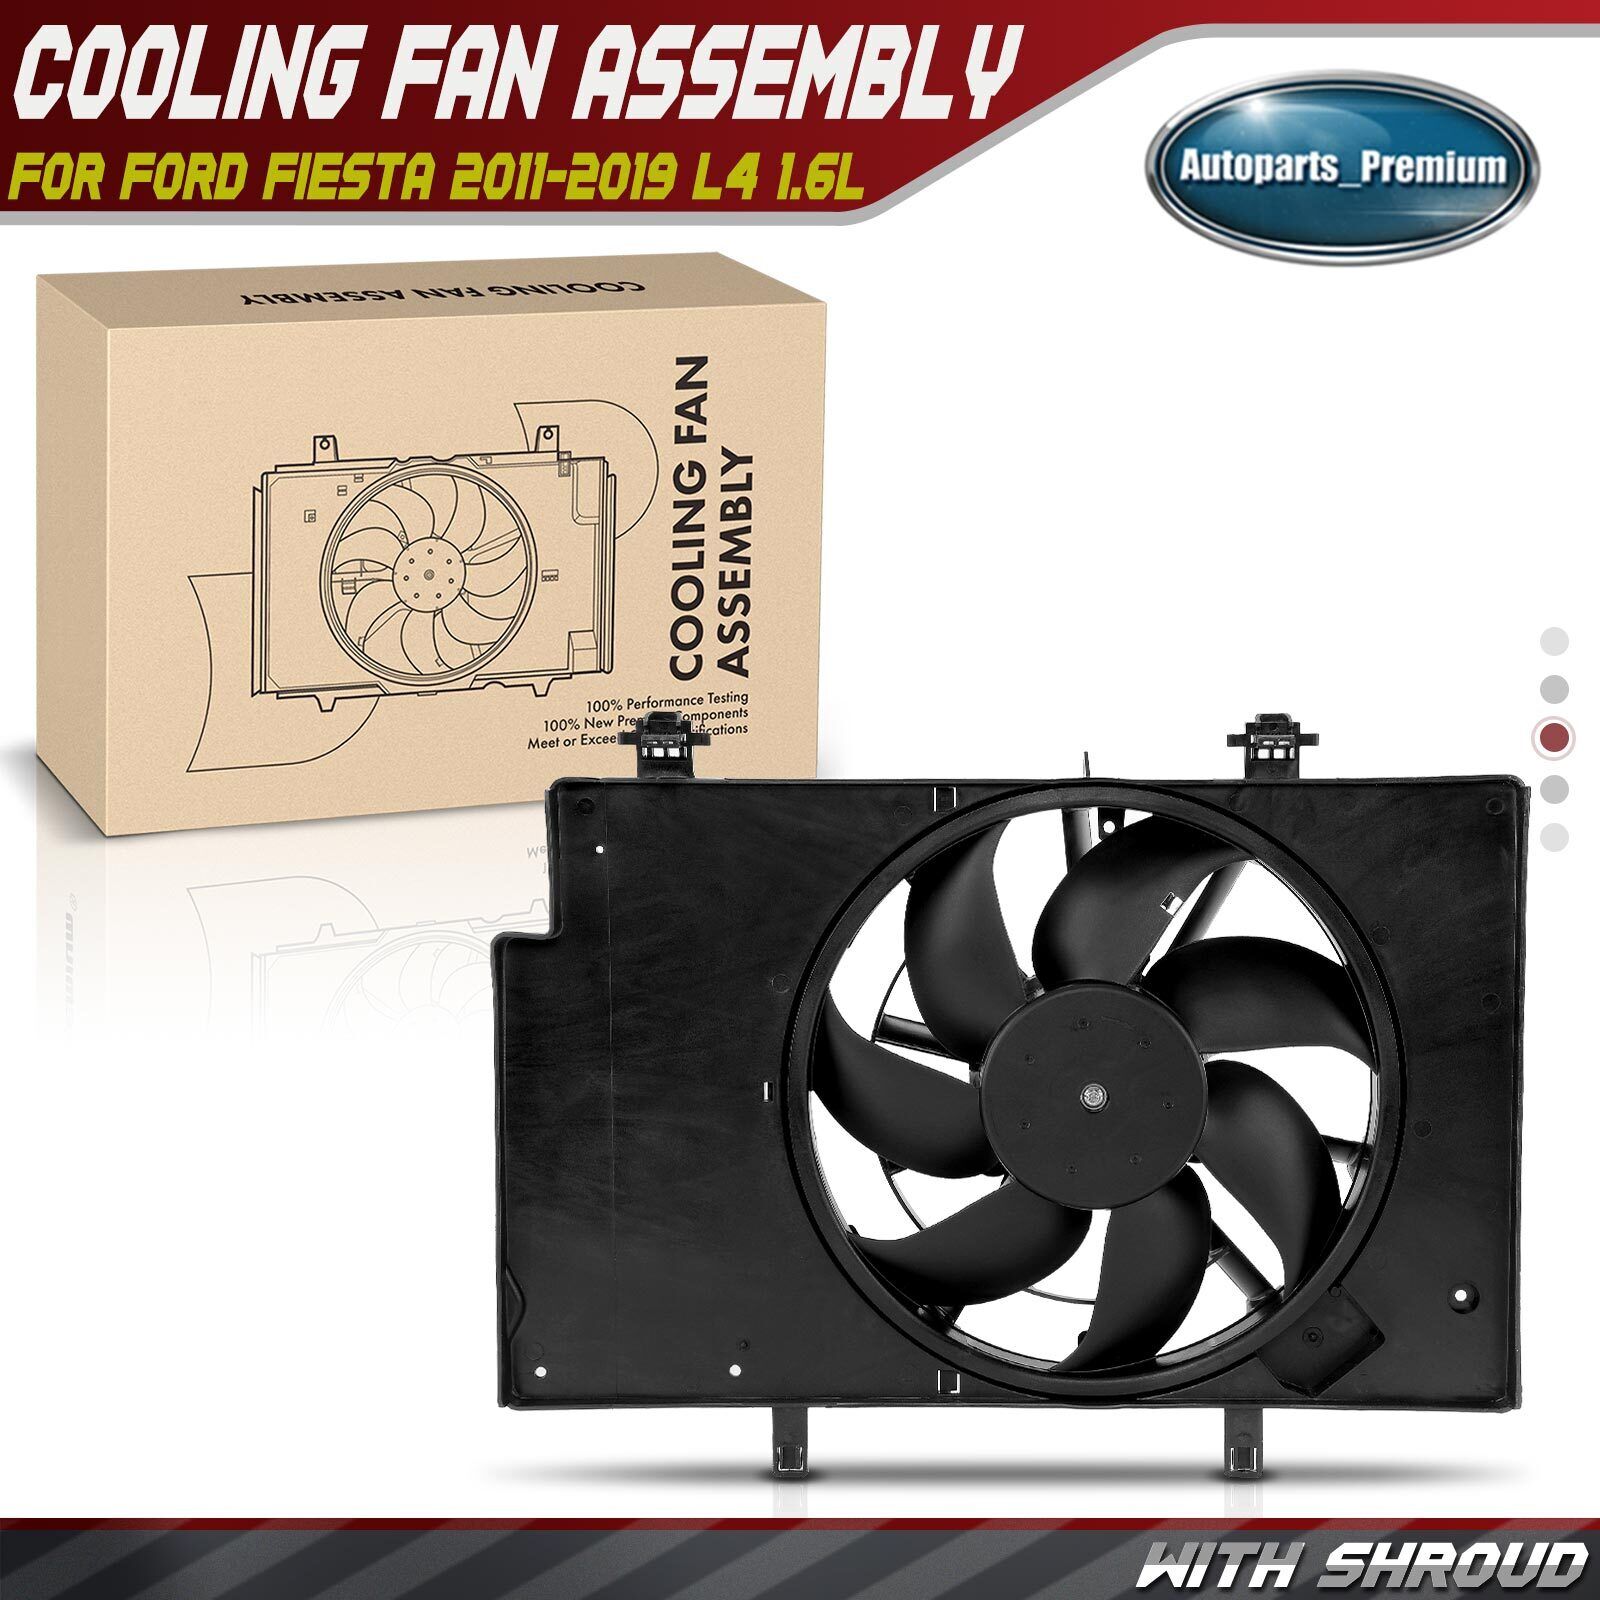 New Radiator Cooling Fan with Shroud Assembly for Ford Fiesta 2011-2019 L4 1.6L